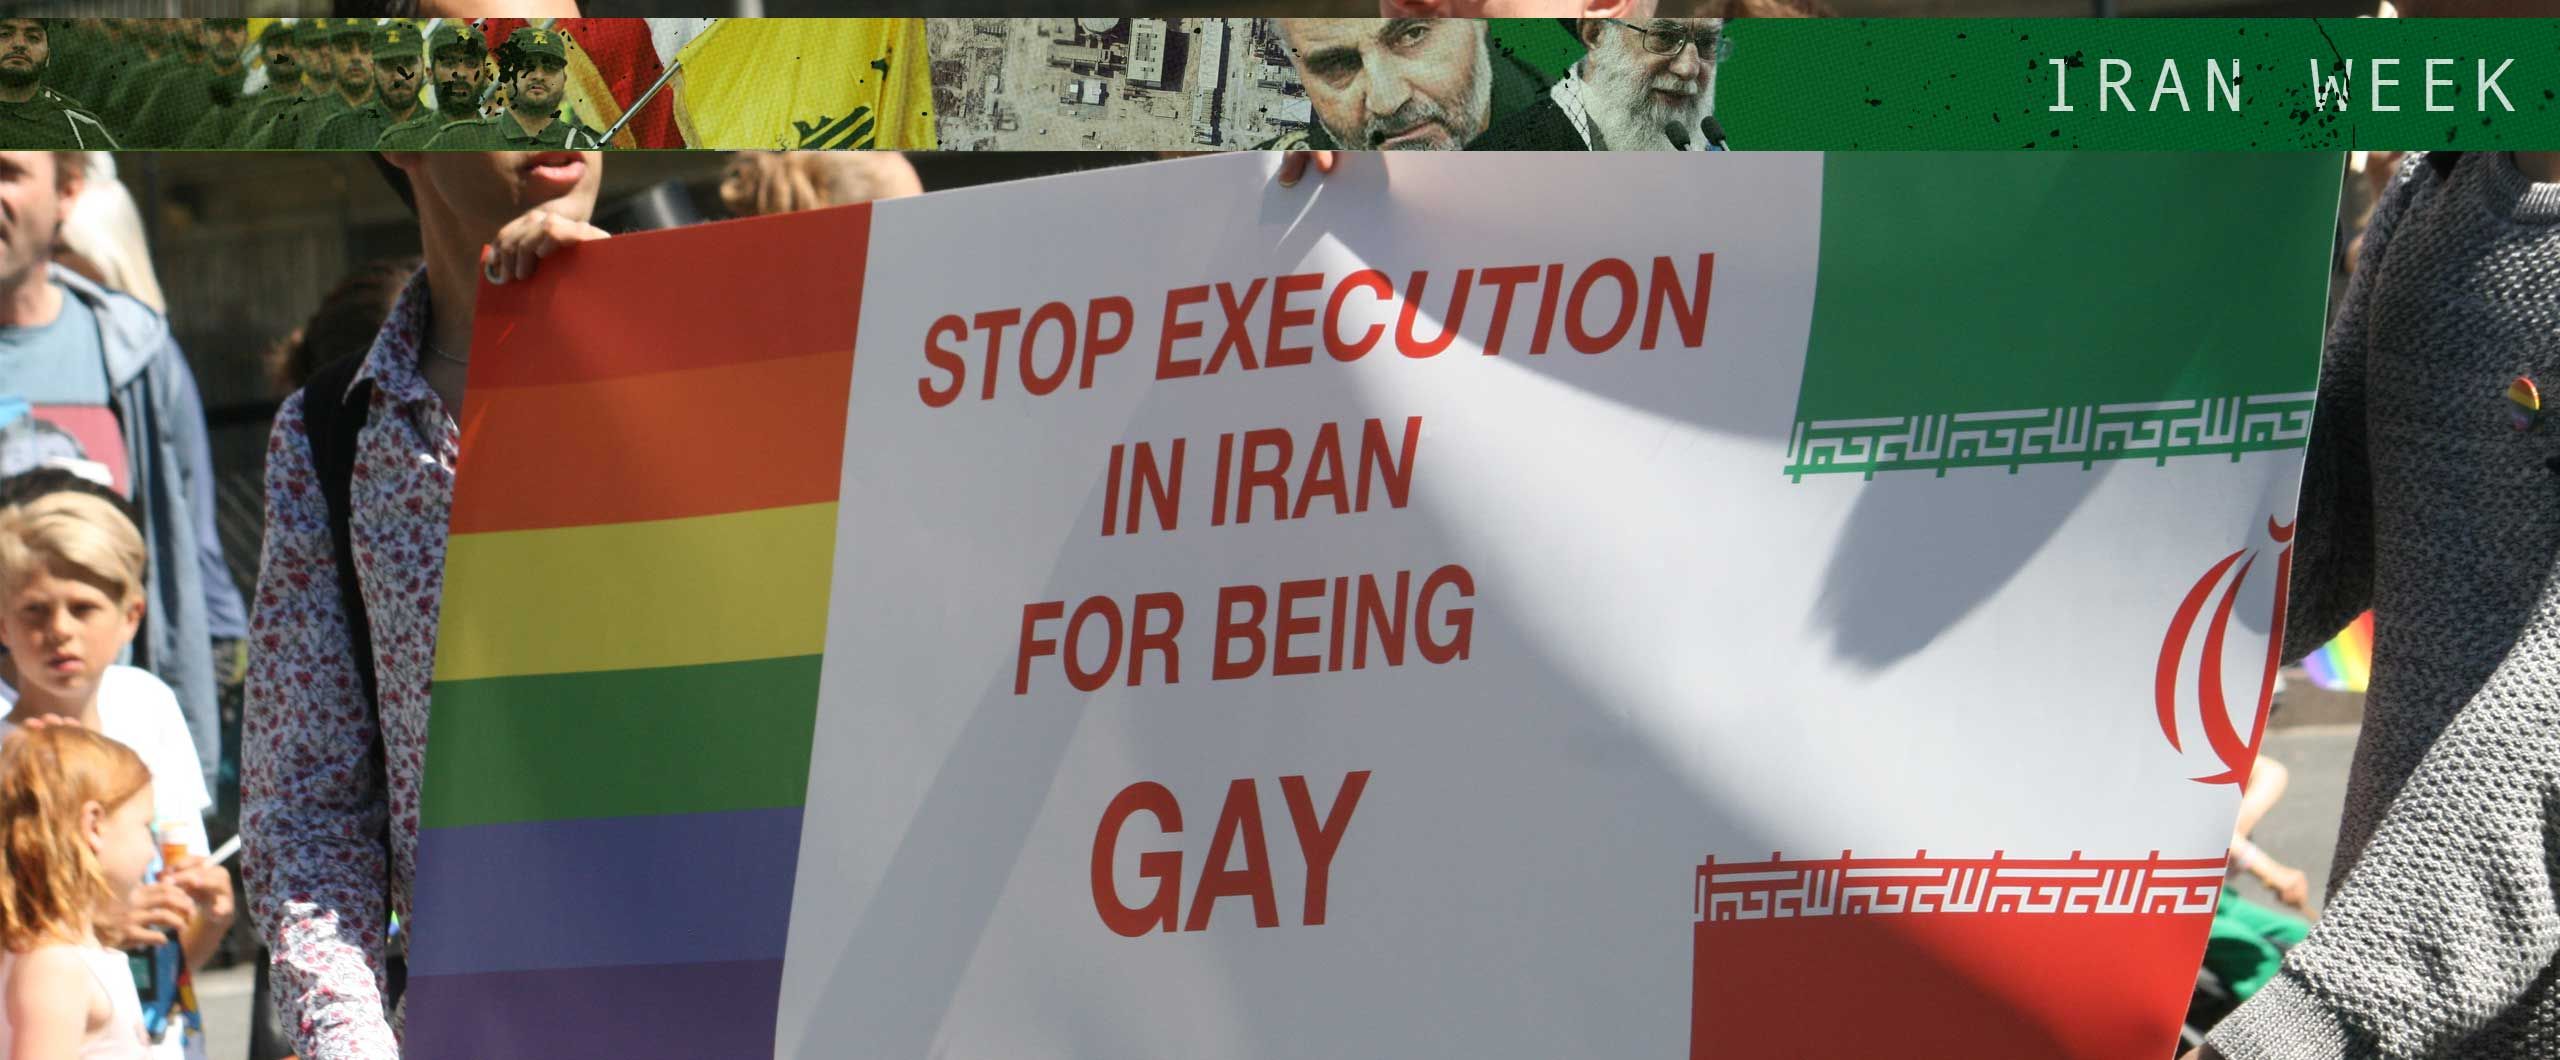 Iran Week How the Iranian Regime Makes War on Queers